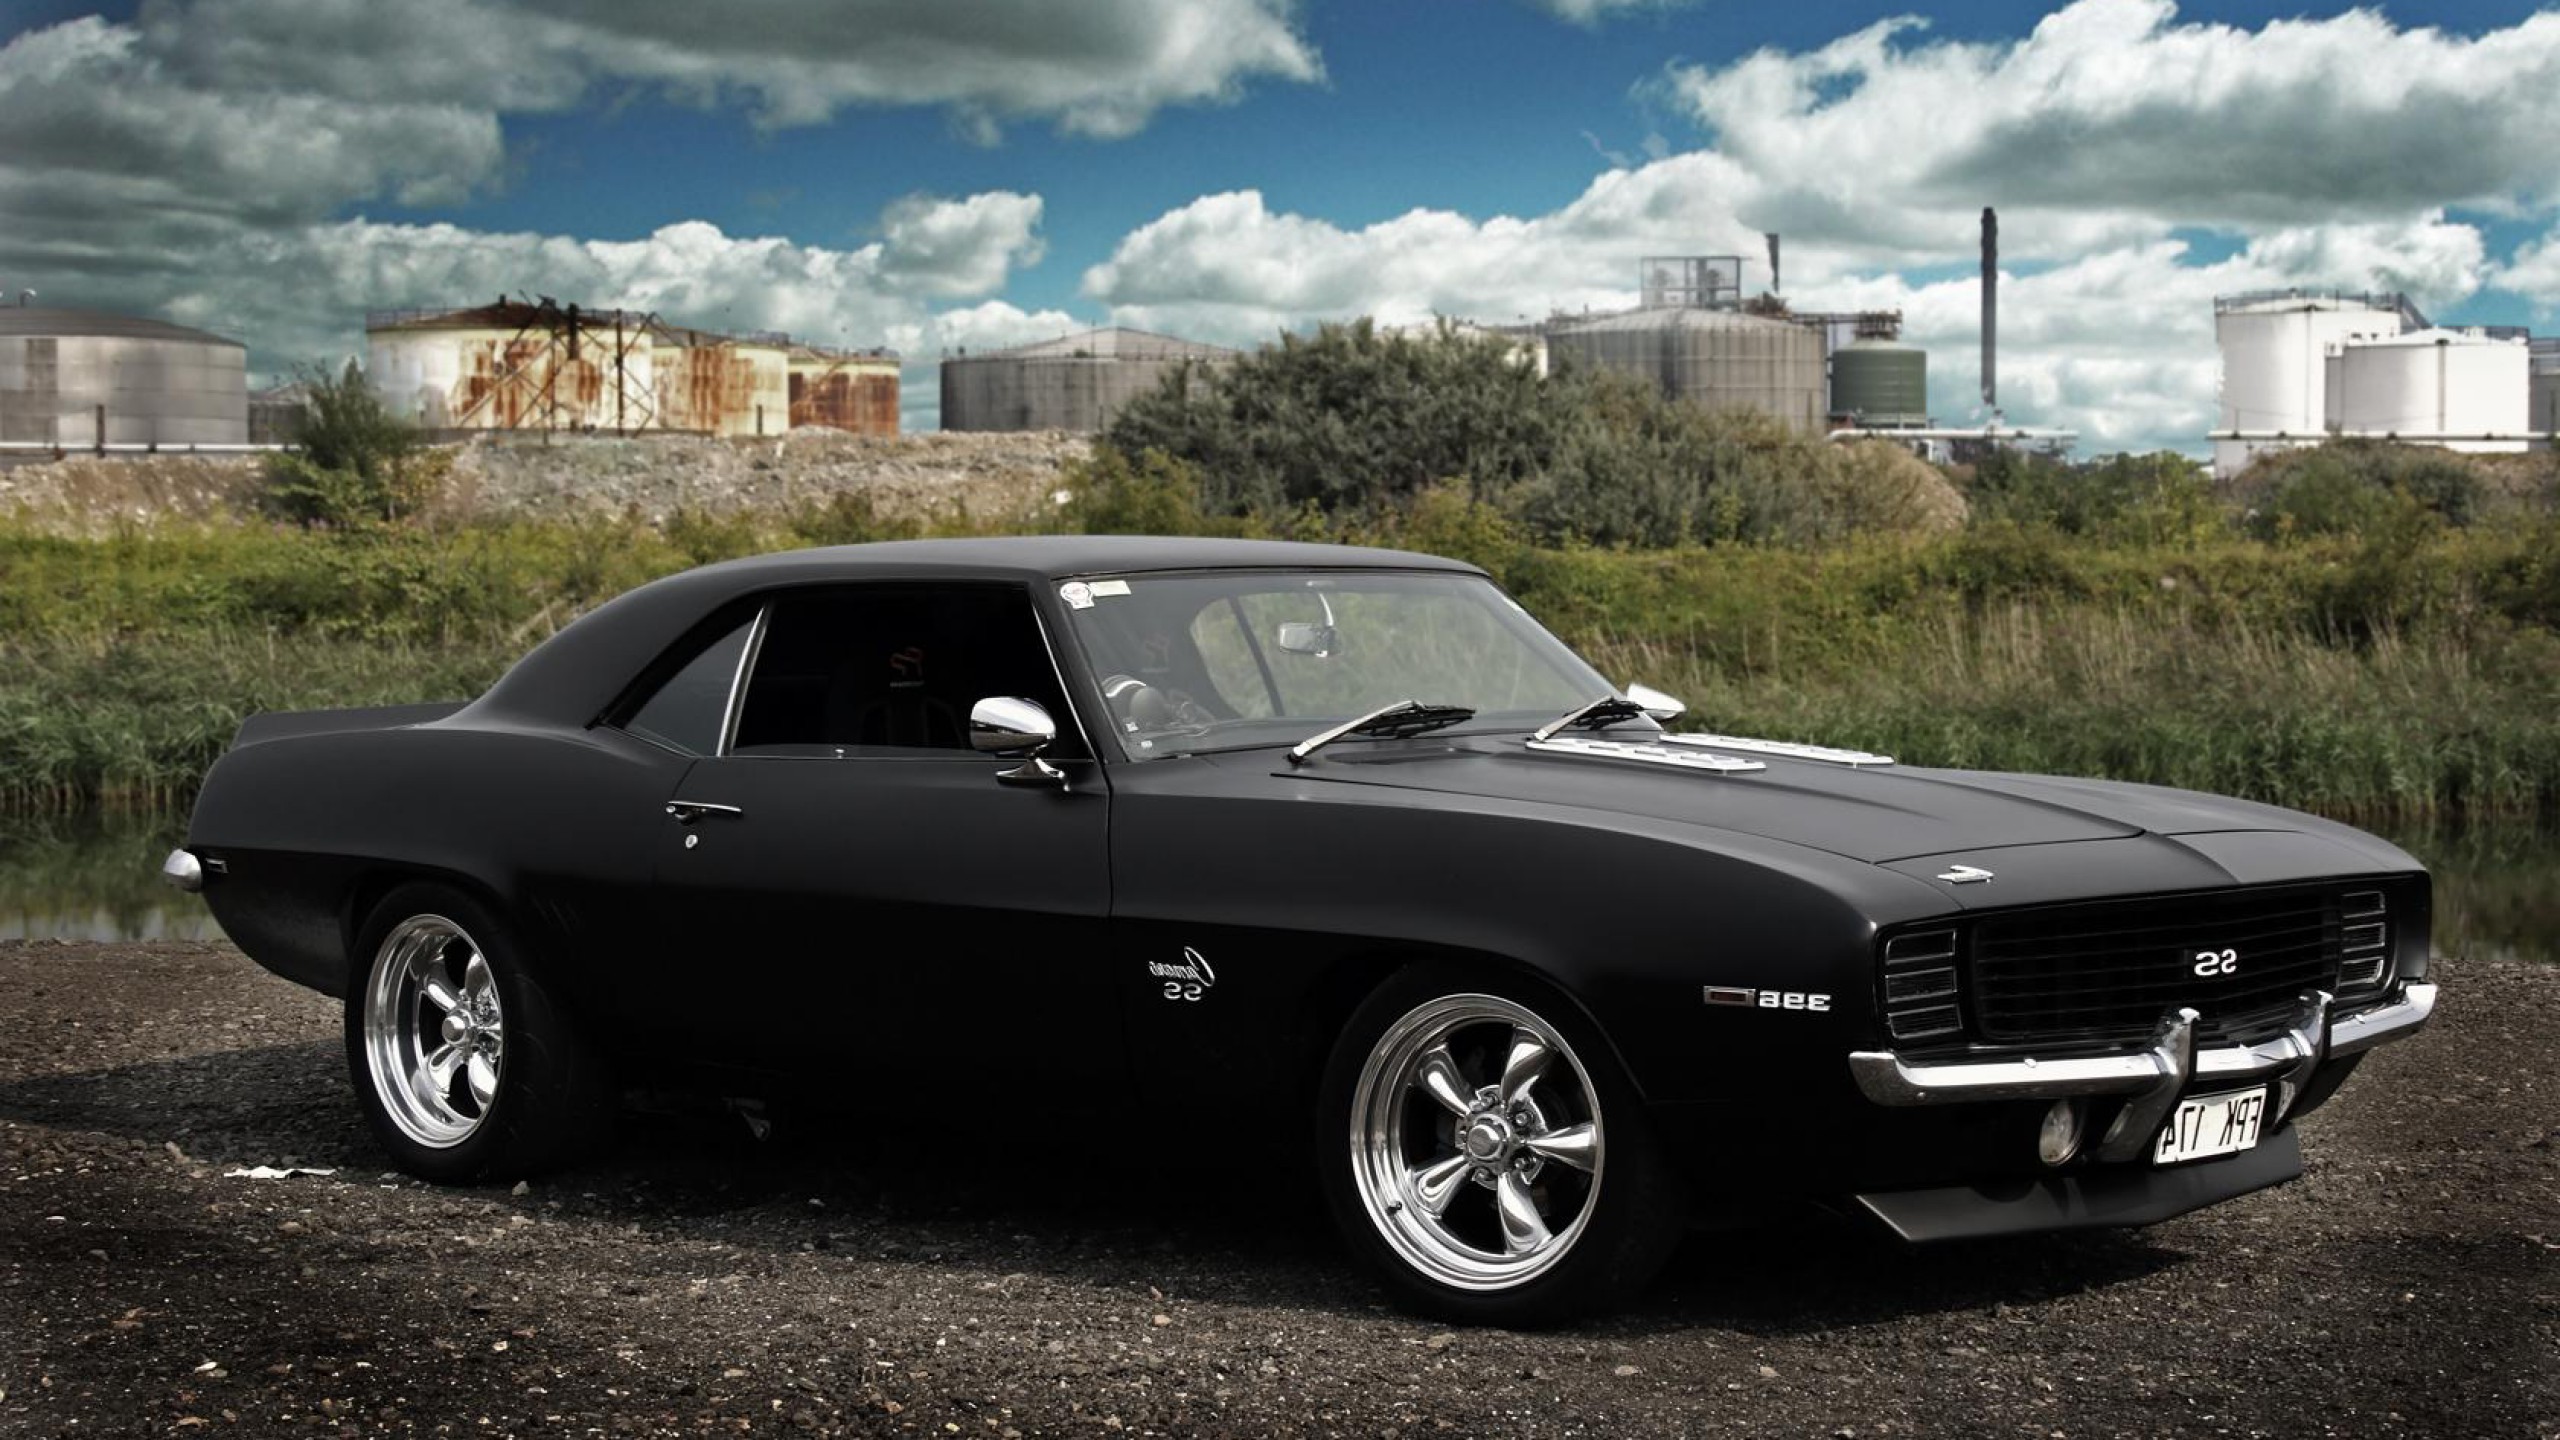 American Muscle Car Hd Wallpaper For Mobile